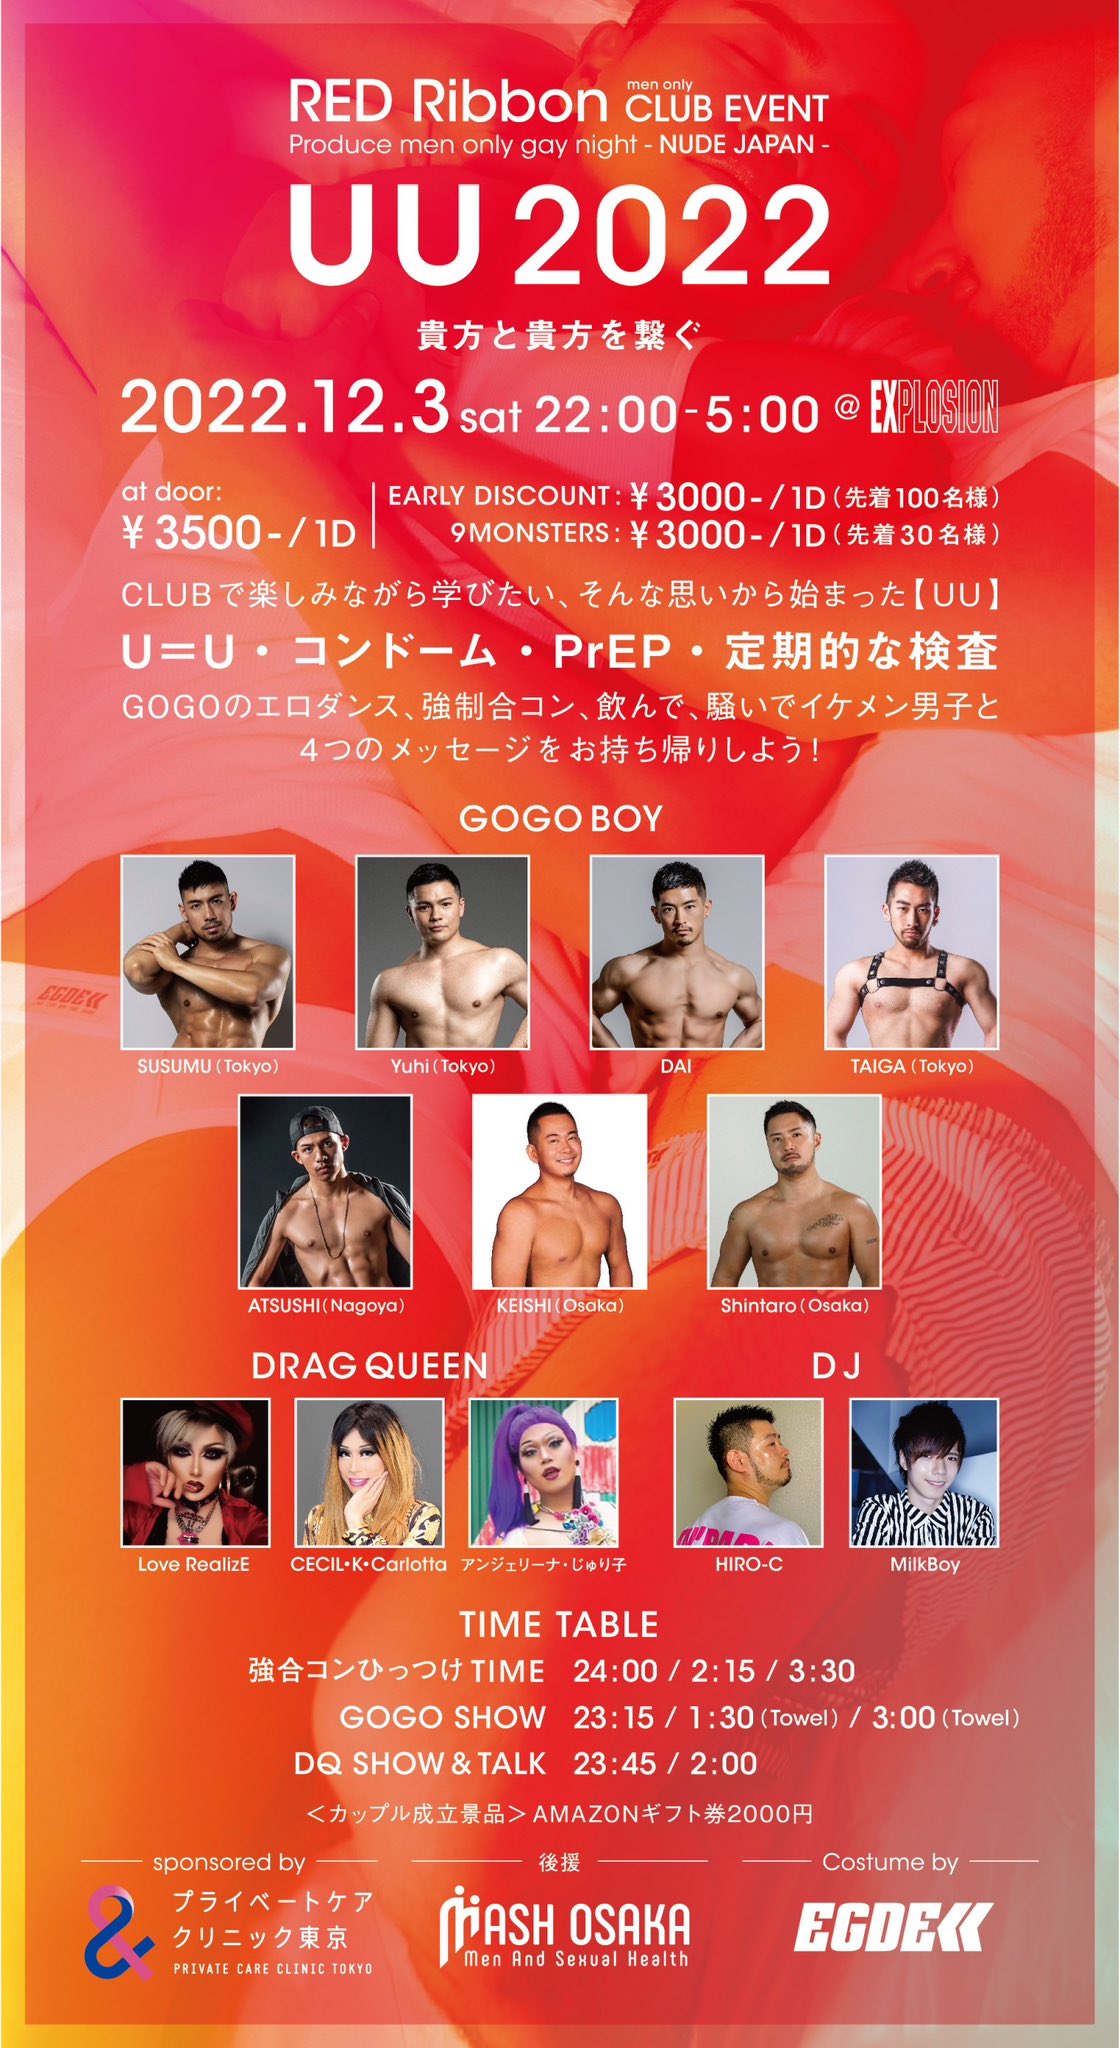 12/3(SAT) 22:00～5:00 OSAKA NUDE JAPAN produce UU2022 -RED Ribbon CLUB EVENT- ＜MEN ONLY＞